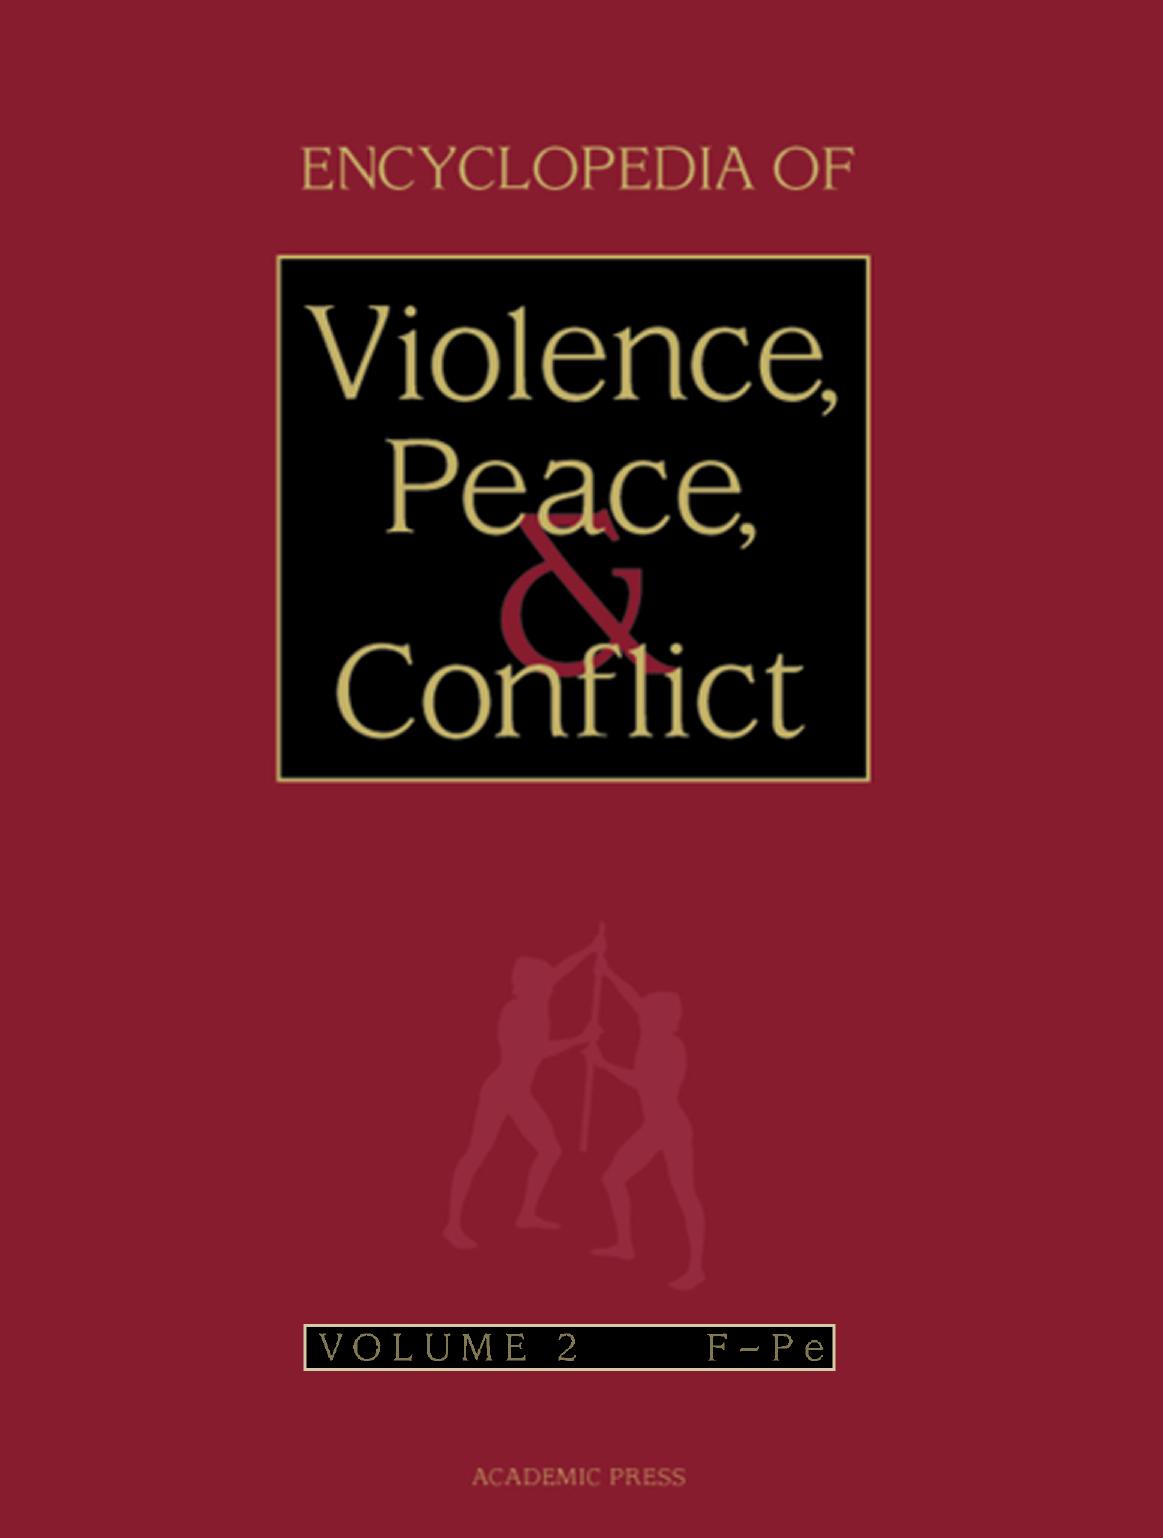 Encyclopedia of Violence, Peace, and Conflict - Volume 2 - F-Pe